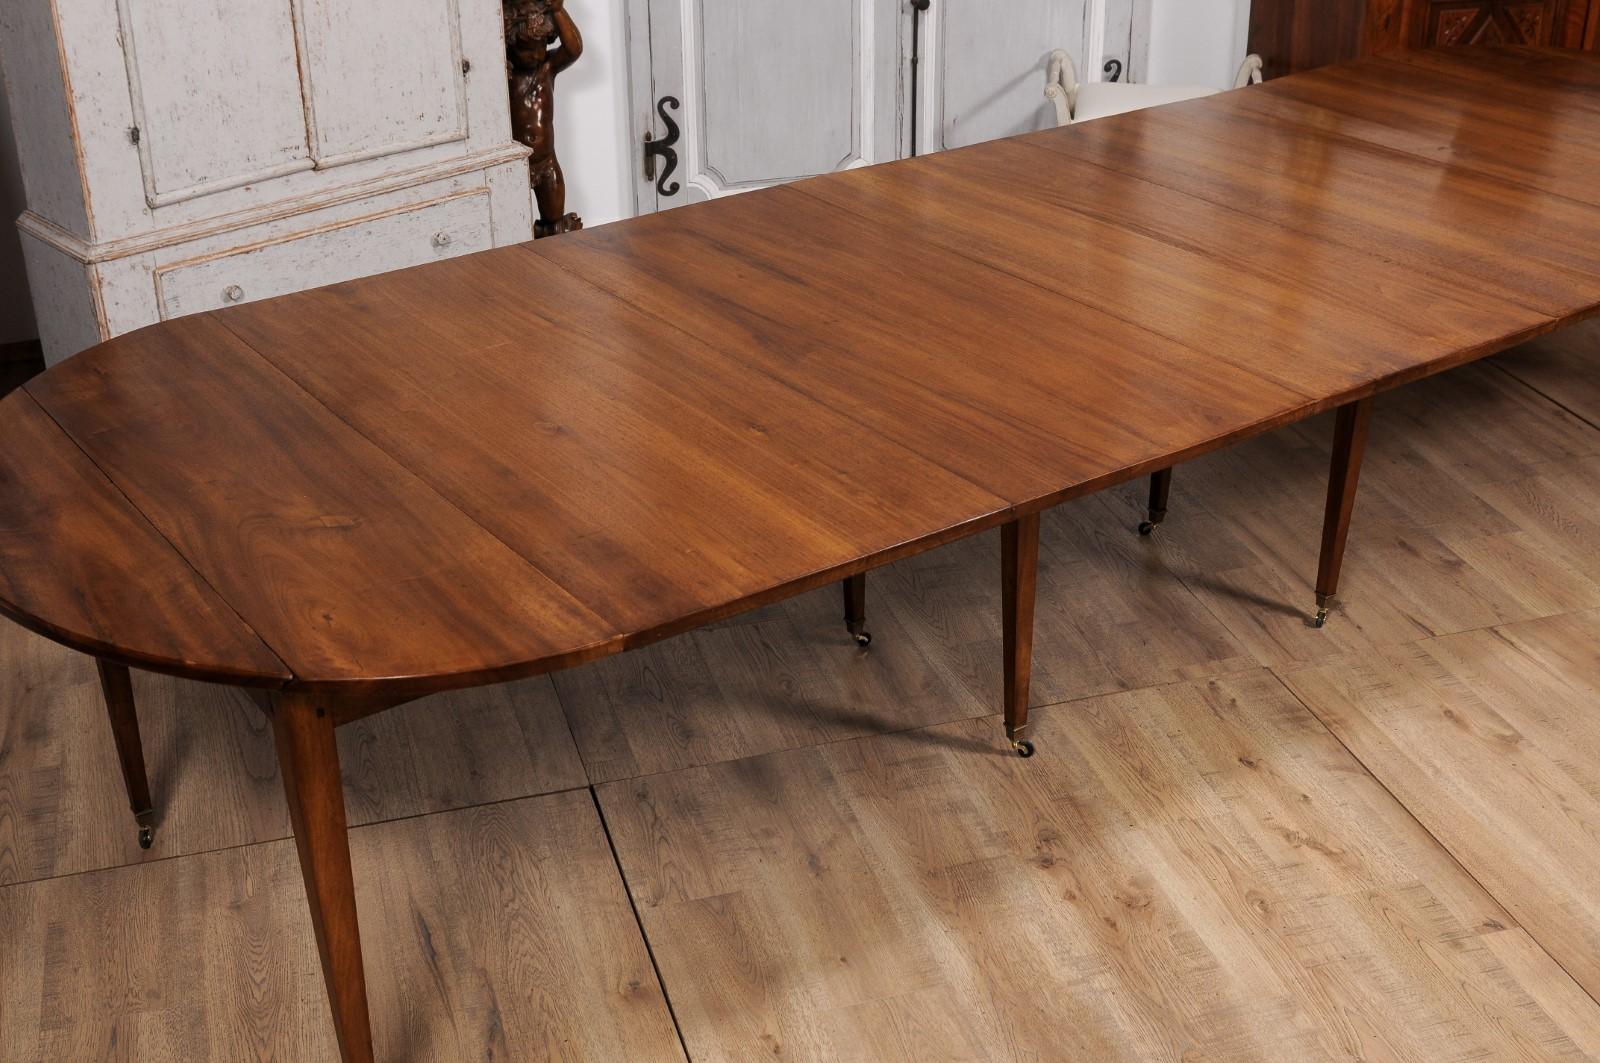 French Turn of the Century Extension Walnut Table With Five Leaves Circa 1900 For Sale 7